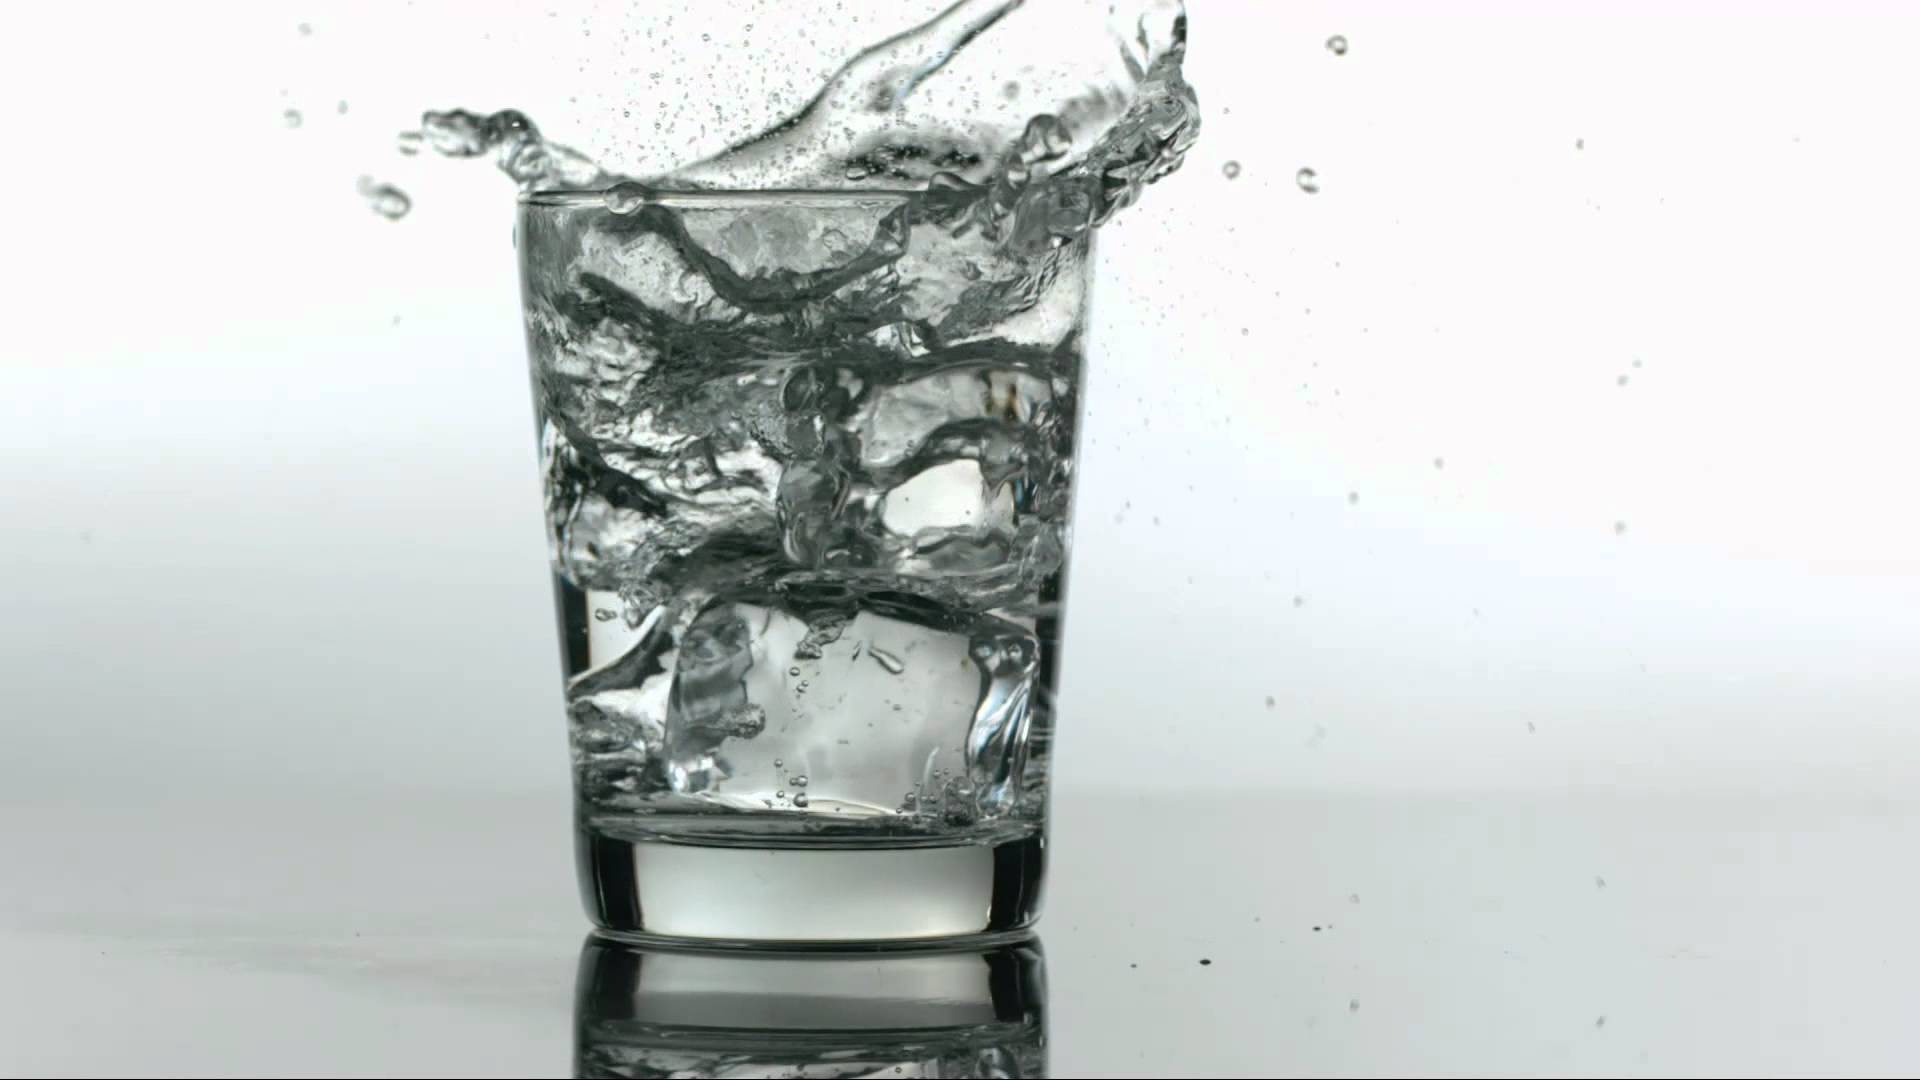 Slow Motion Ice Dropping into Water Glass - YouTube